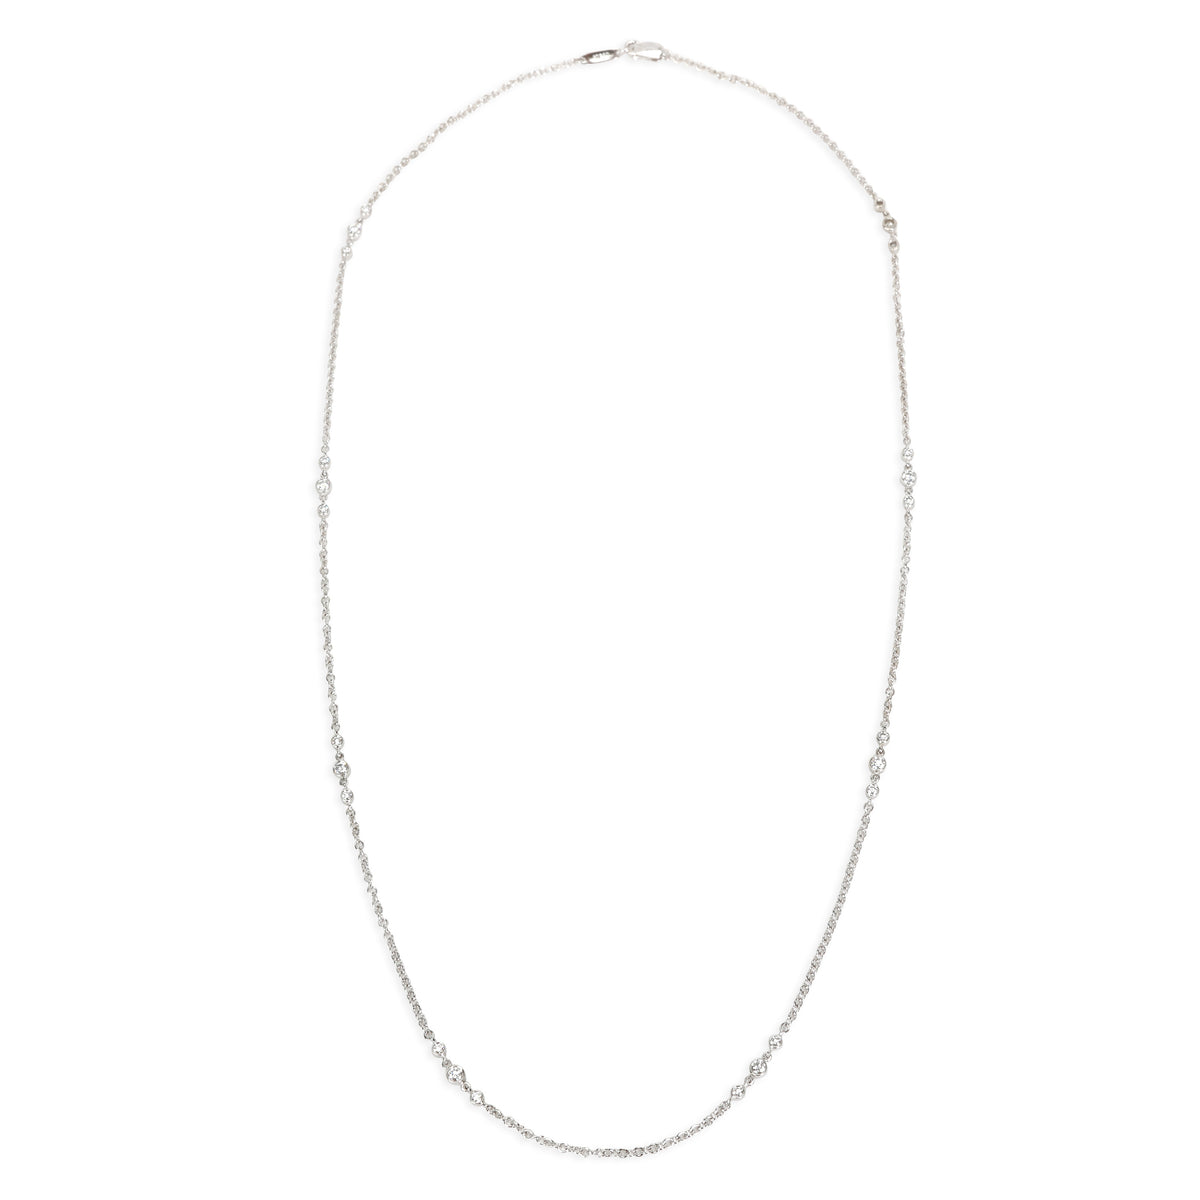 Tiffany & Co. Diamonds by the Yard Necklace in  Platinum 0.56 CTW